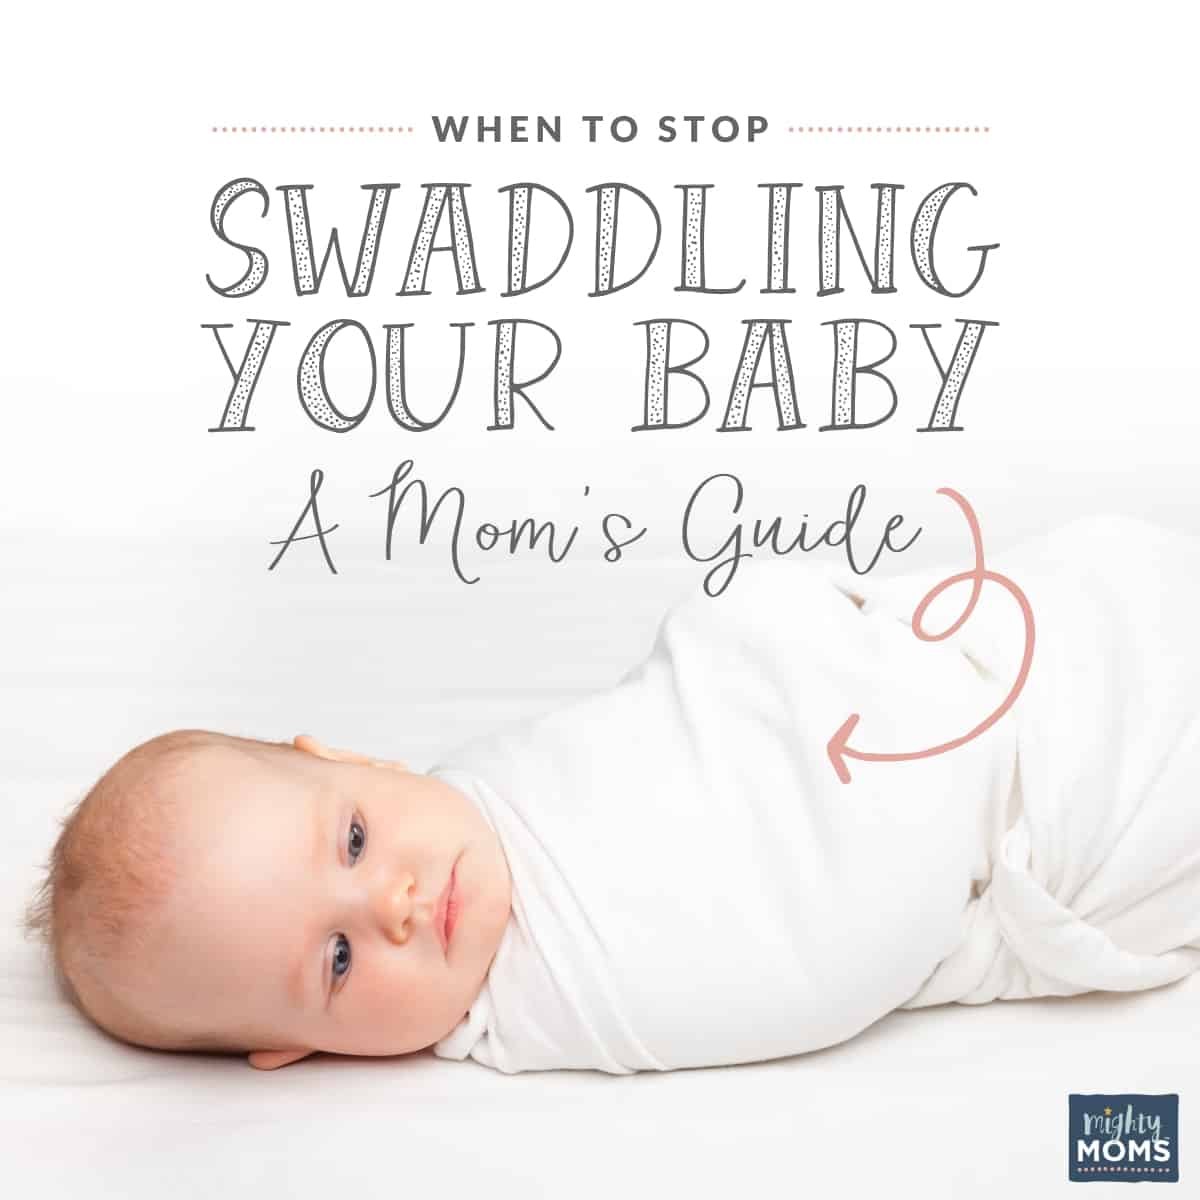 How to Stop Swaddling Your Baby